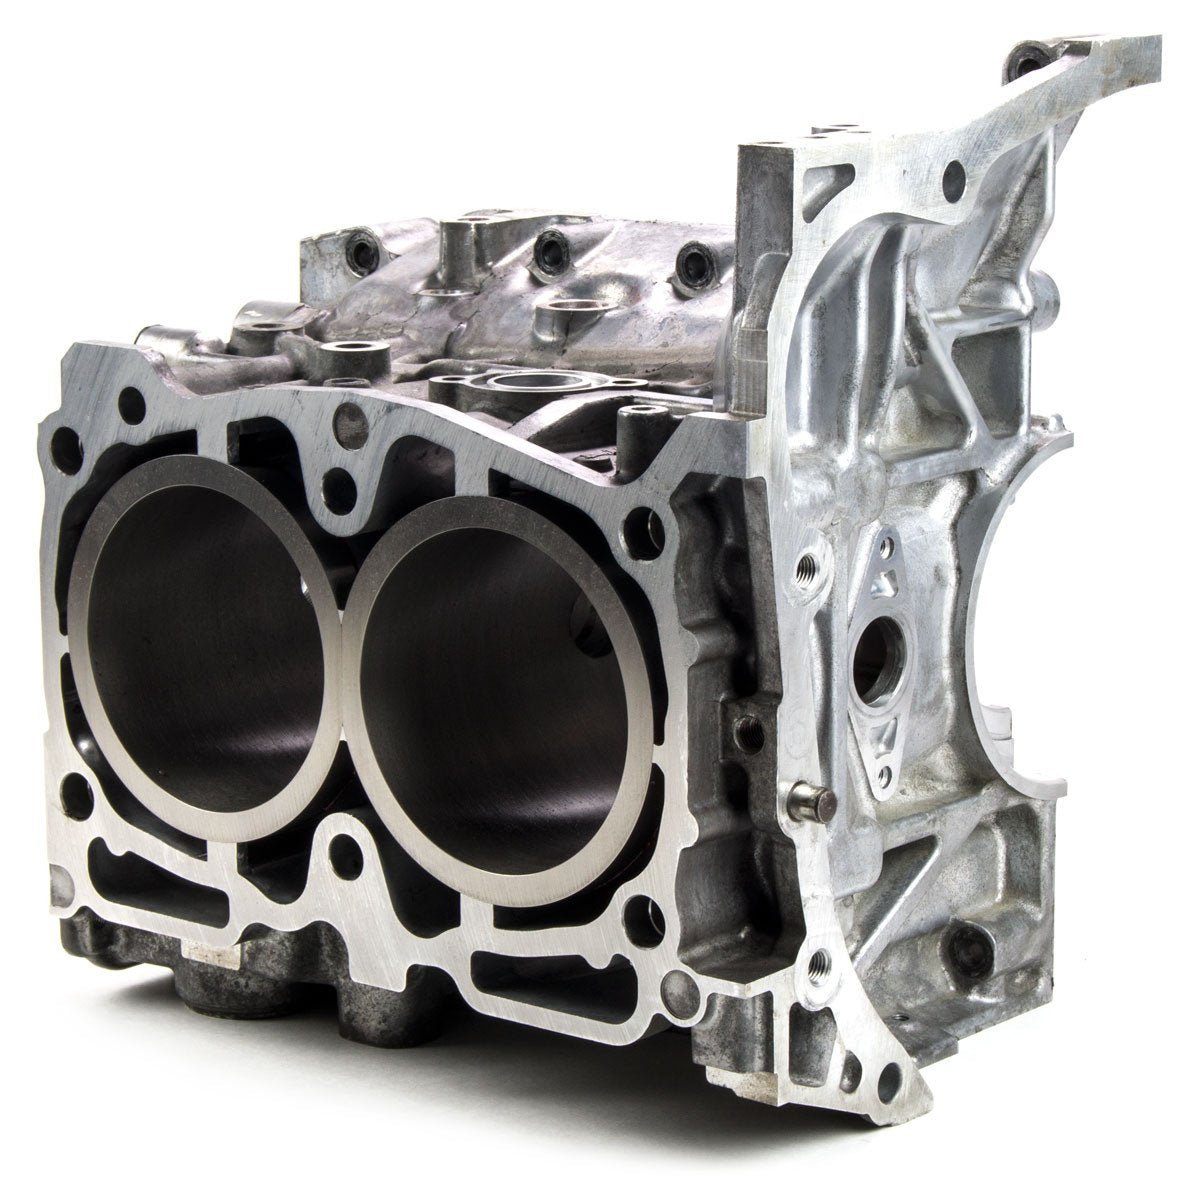 Sleeved EJ Series Engine Block without Crank - Customer Supplied Block - Modern Automotive Performance
 - 1